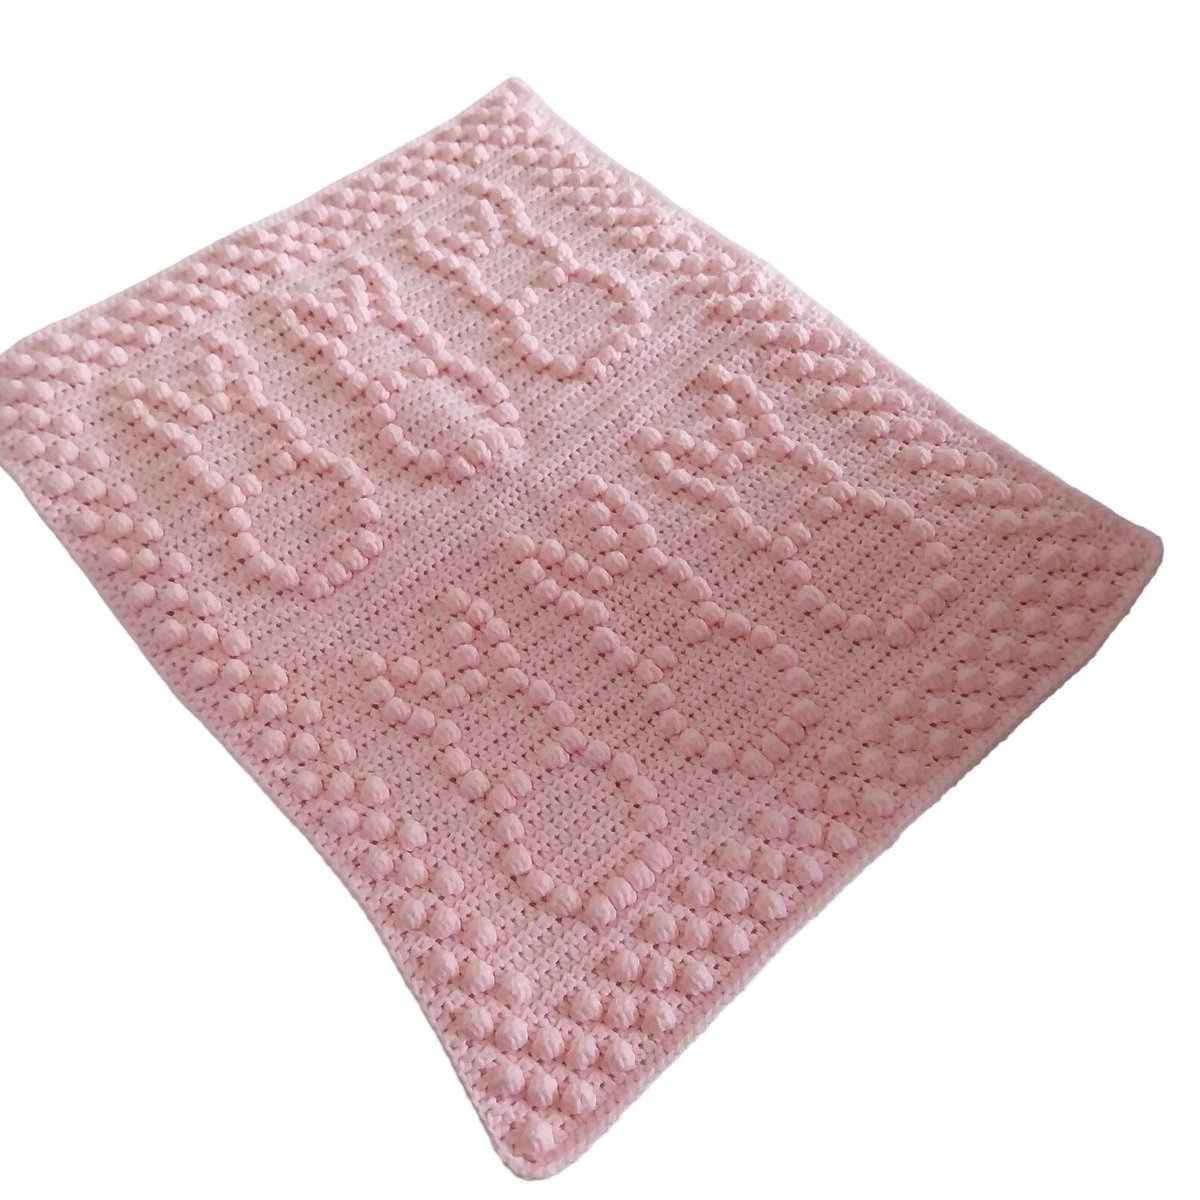 Welcome your new baby with this adorable pink crochet blanket, featuring a cute puff bobbly bunny pattern. Perfect for your nursery or as a thoughtful gift! Shop now on #Etsy: knittingtopia.etsy.com/listing/131240… #knittingtopia #NewMum #BabyBlanket #MHHSBD #craftbizparty #babyshowergifts